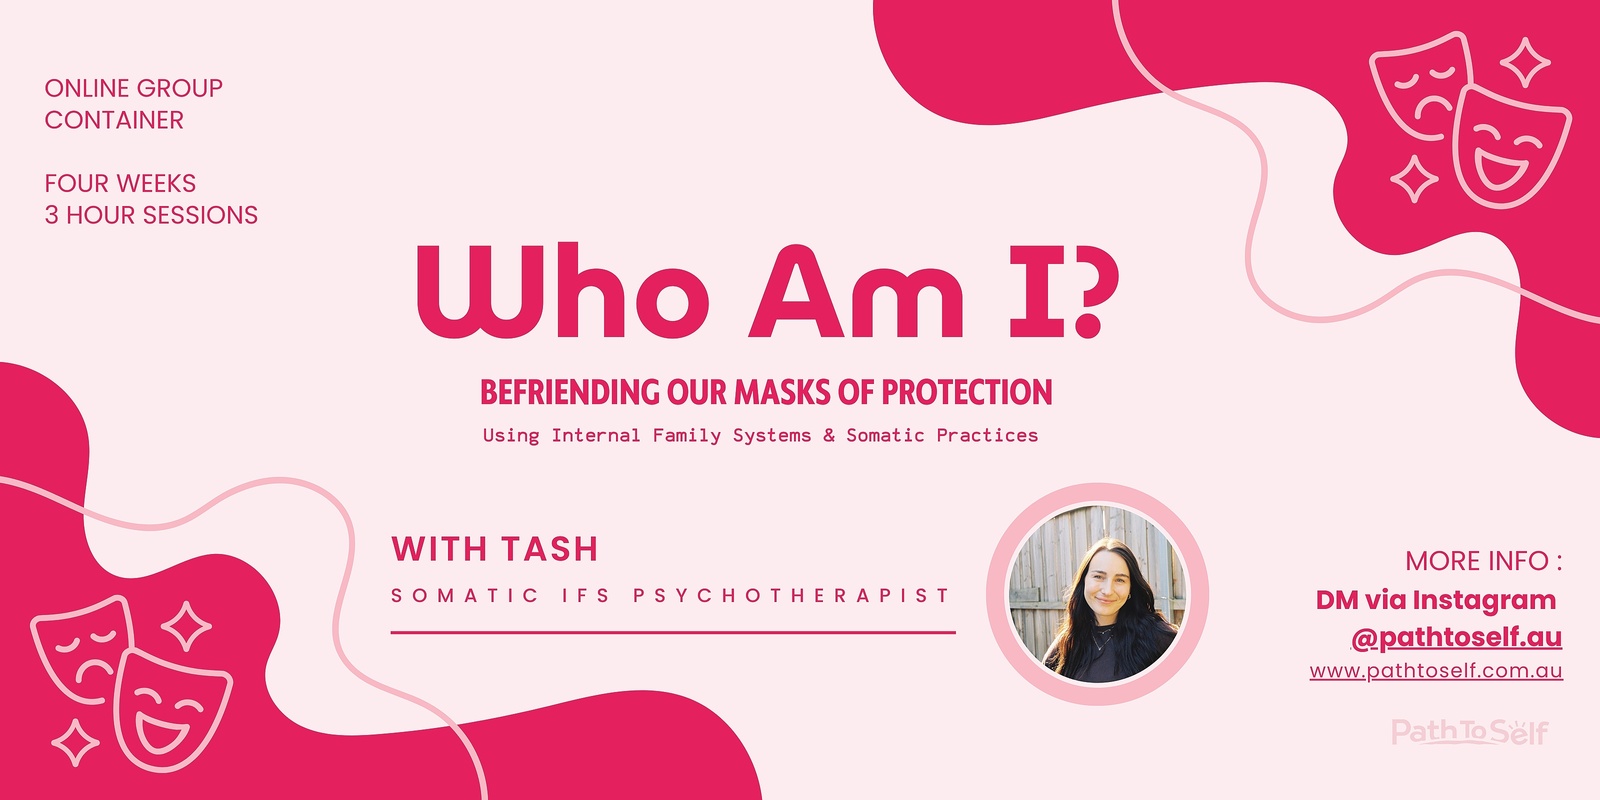 Banner image for Who Am I? Befriending our Masks of Protection  |  A Four Week Group Container using IFS, Creative Expression and Somatic Practices